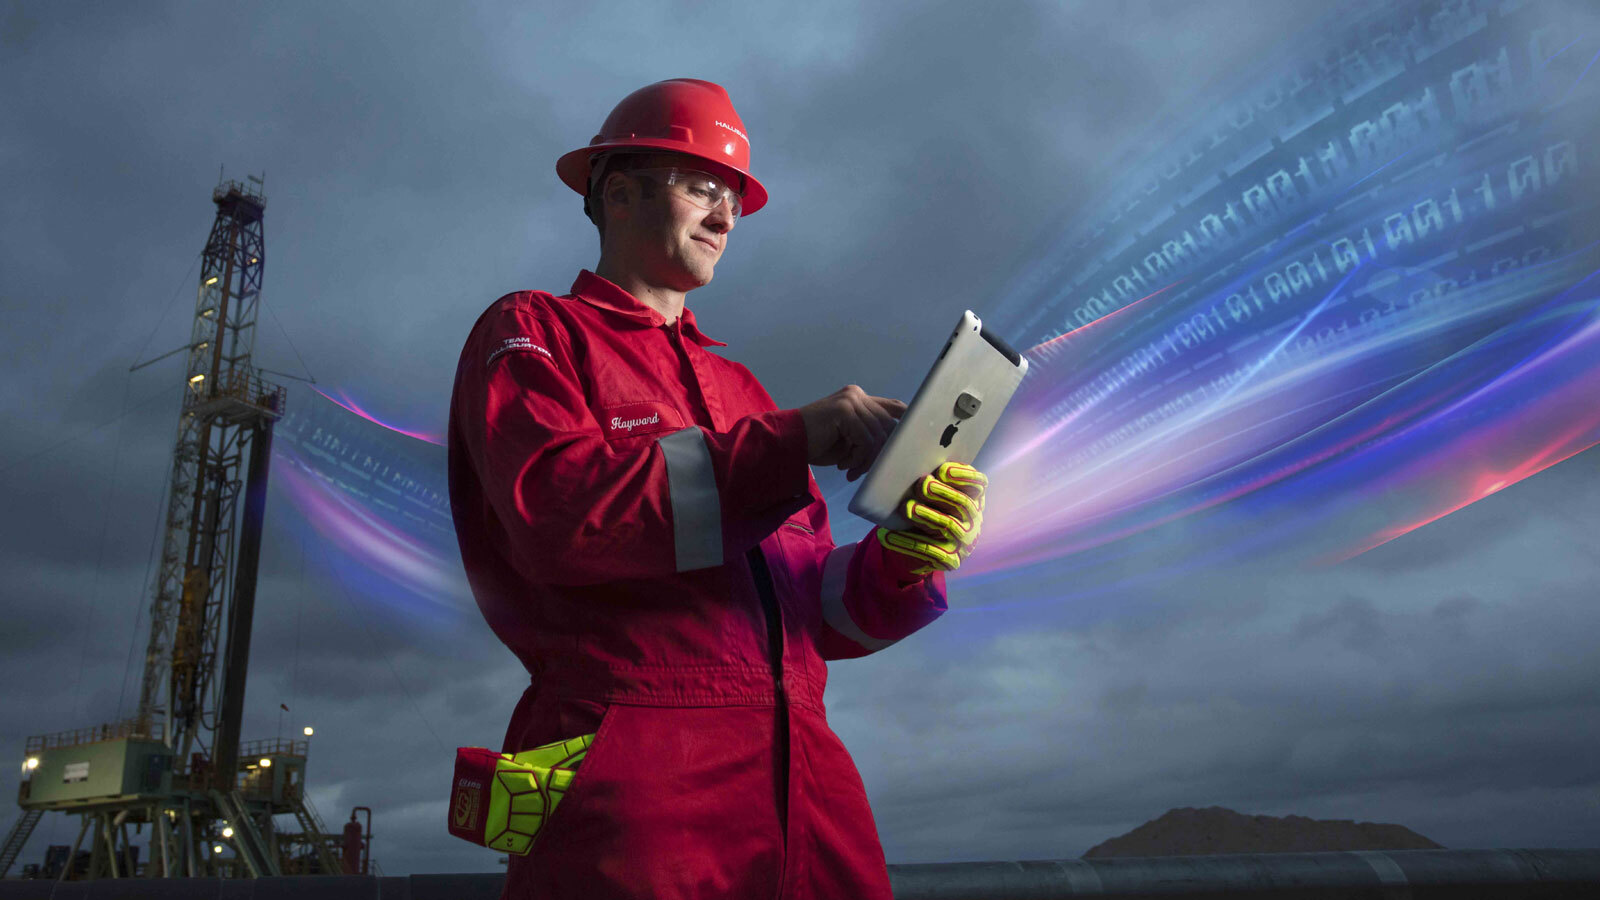 Image of a halliburton engineer looking at tablet